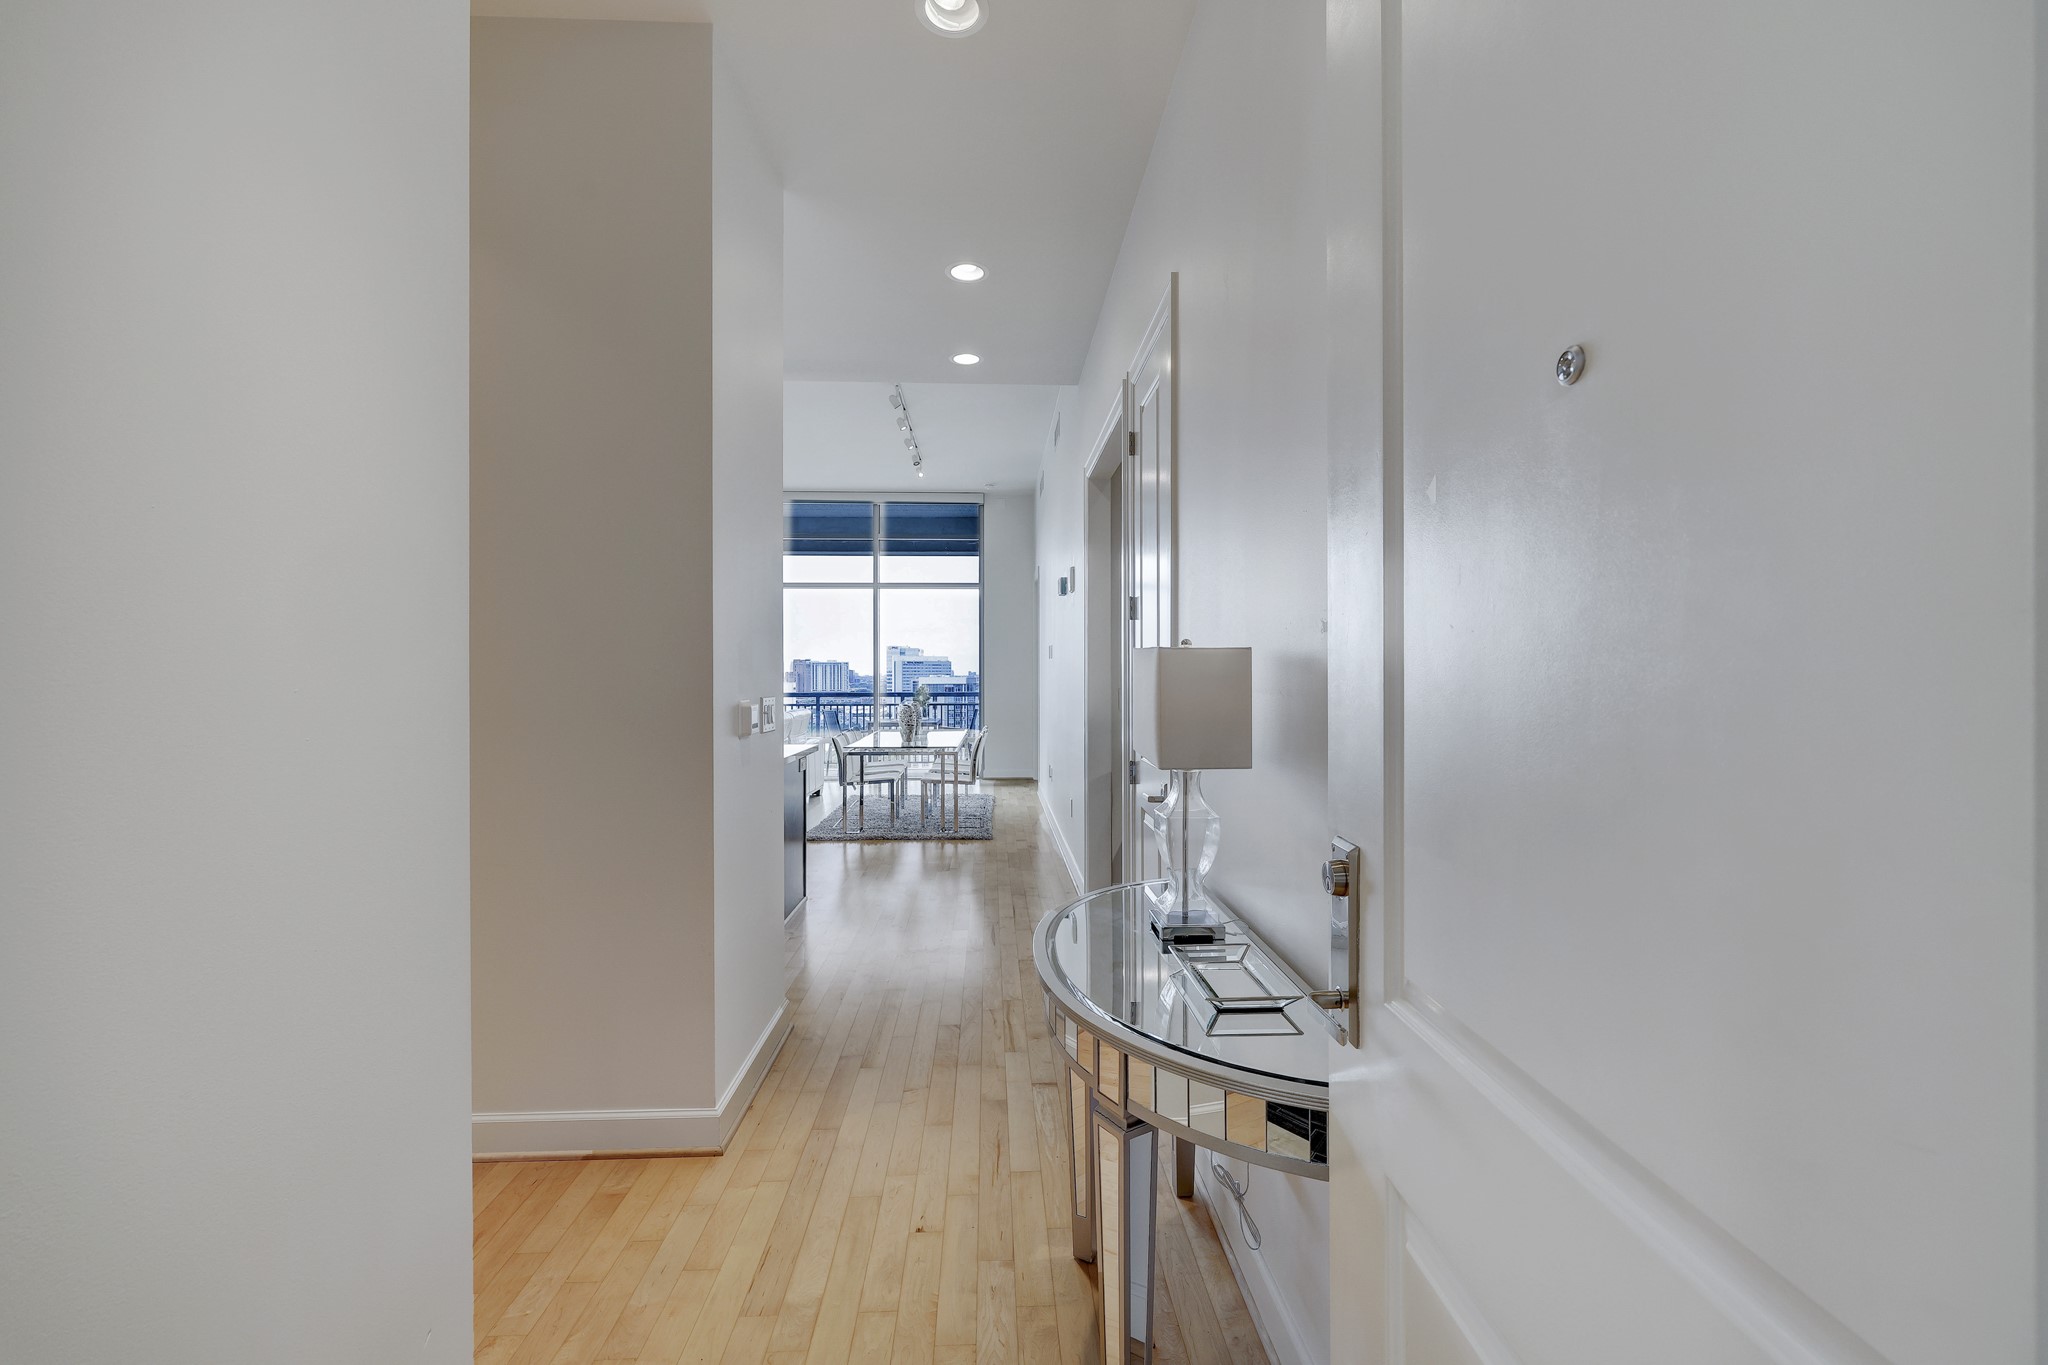 This residence is located on the coveted top floor of Highland Tower, and is conveniently close to the elevators. Two assigned parking spaces in the attached (remote control-access) parking garage and a storage unit are included with the residence.